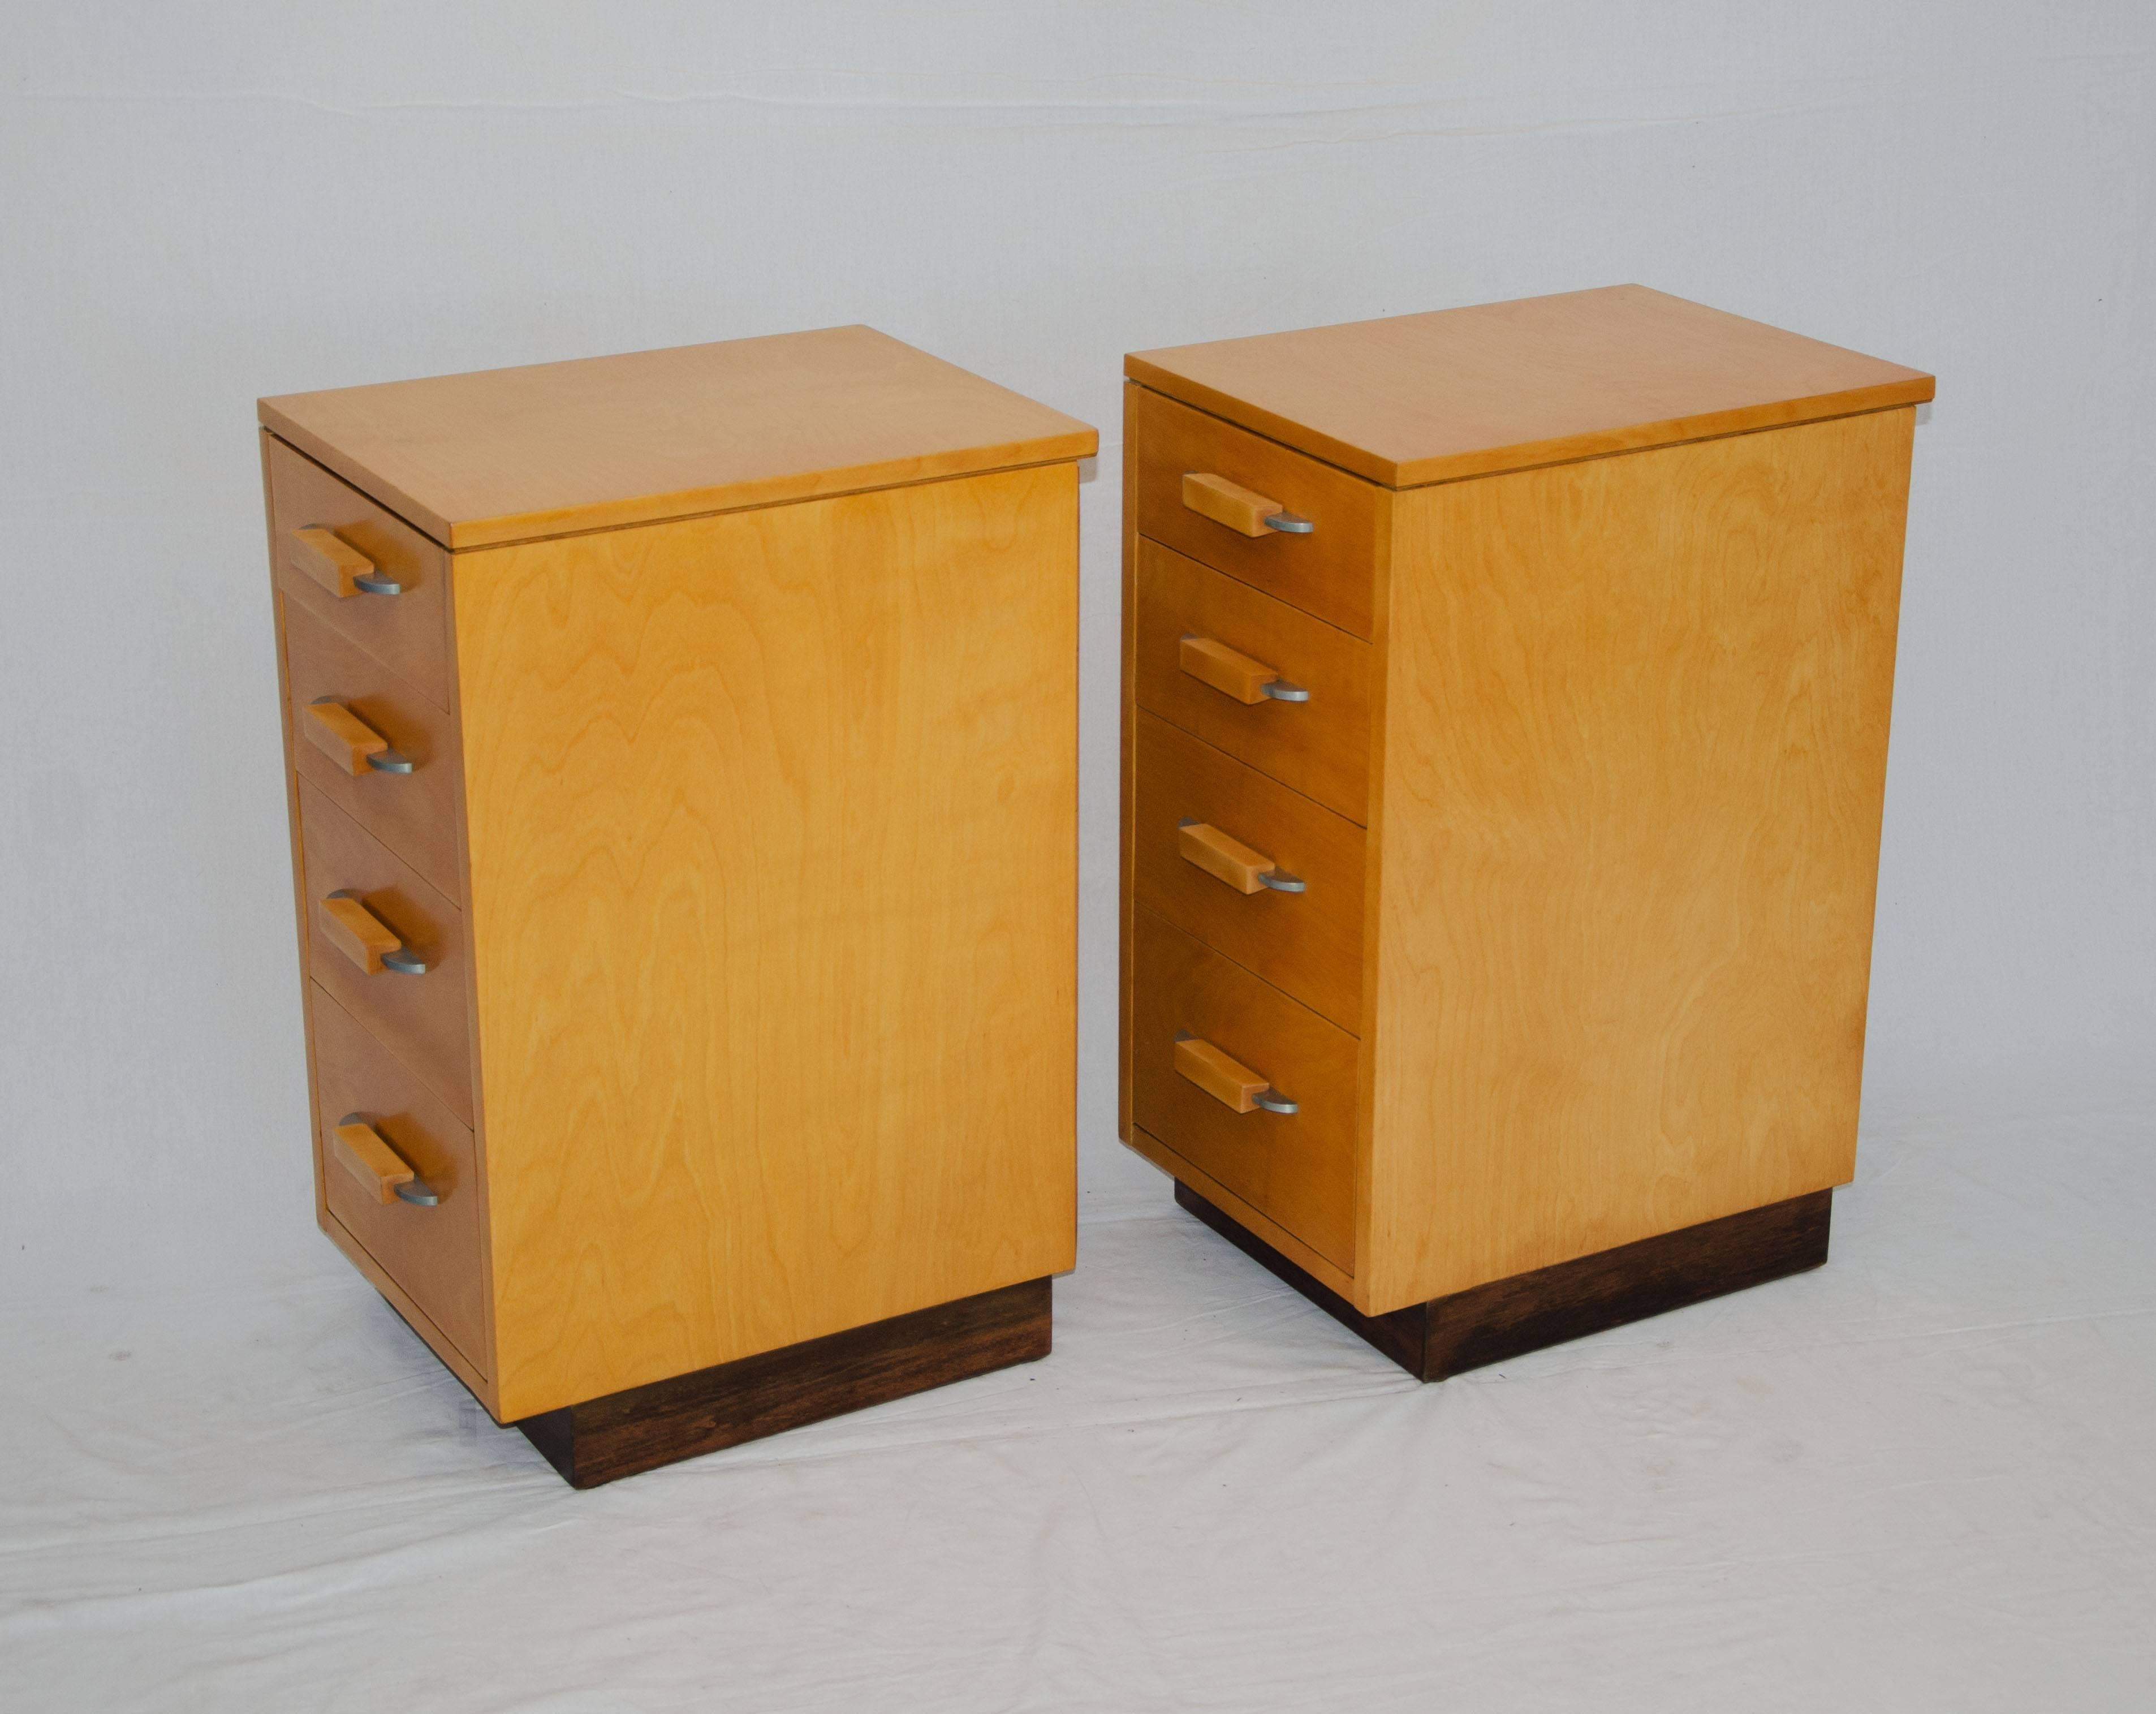 These two small chests allow storage in small spaces or could also serve as night stands. Designed as a modular system known as the 